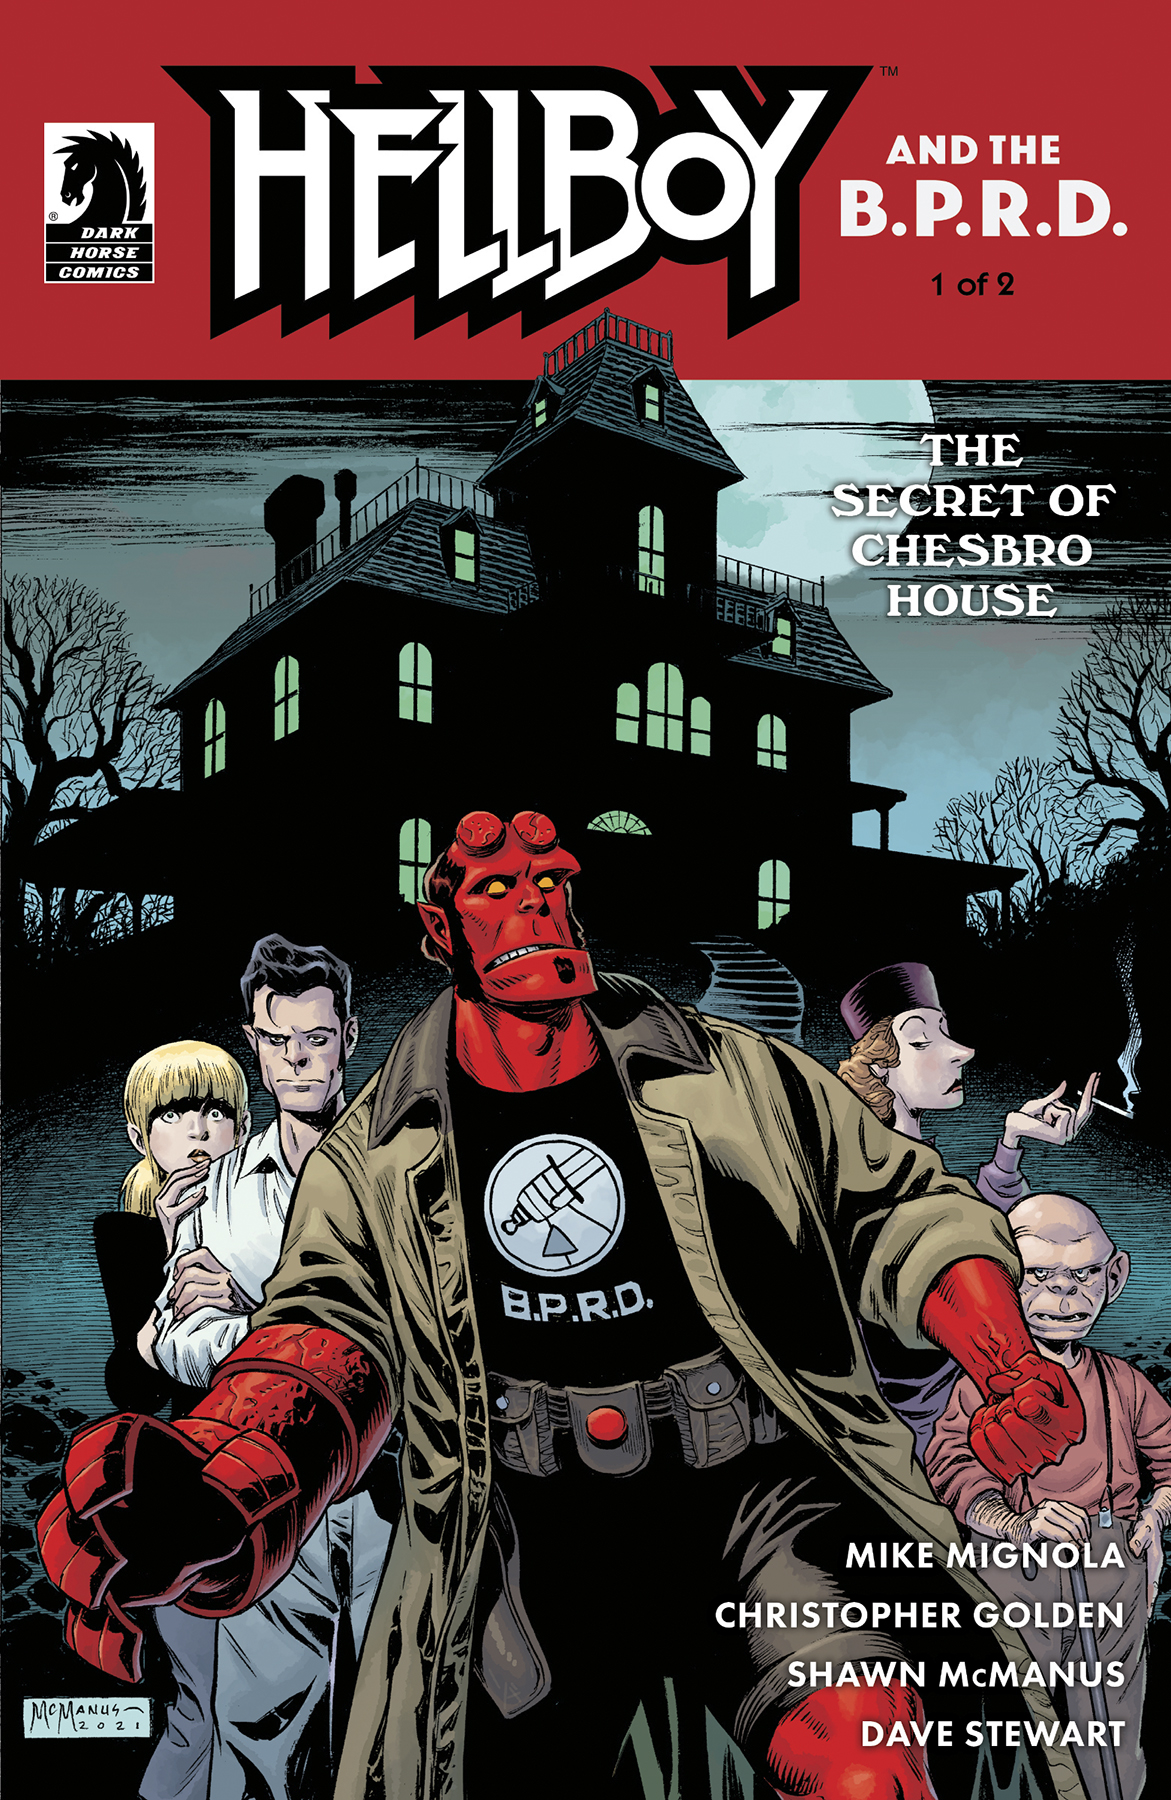 Hellboy & the B.P.R.D. Ongoing #43 Secret of Chesbro House #1 Cover A Mcmanus (Of 2)